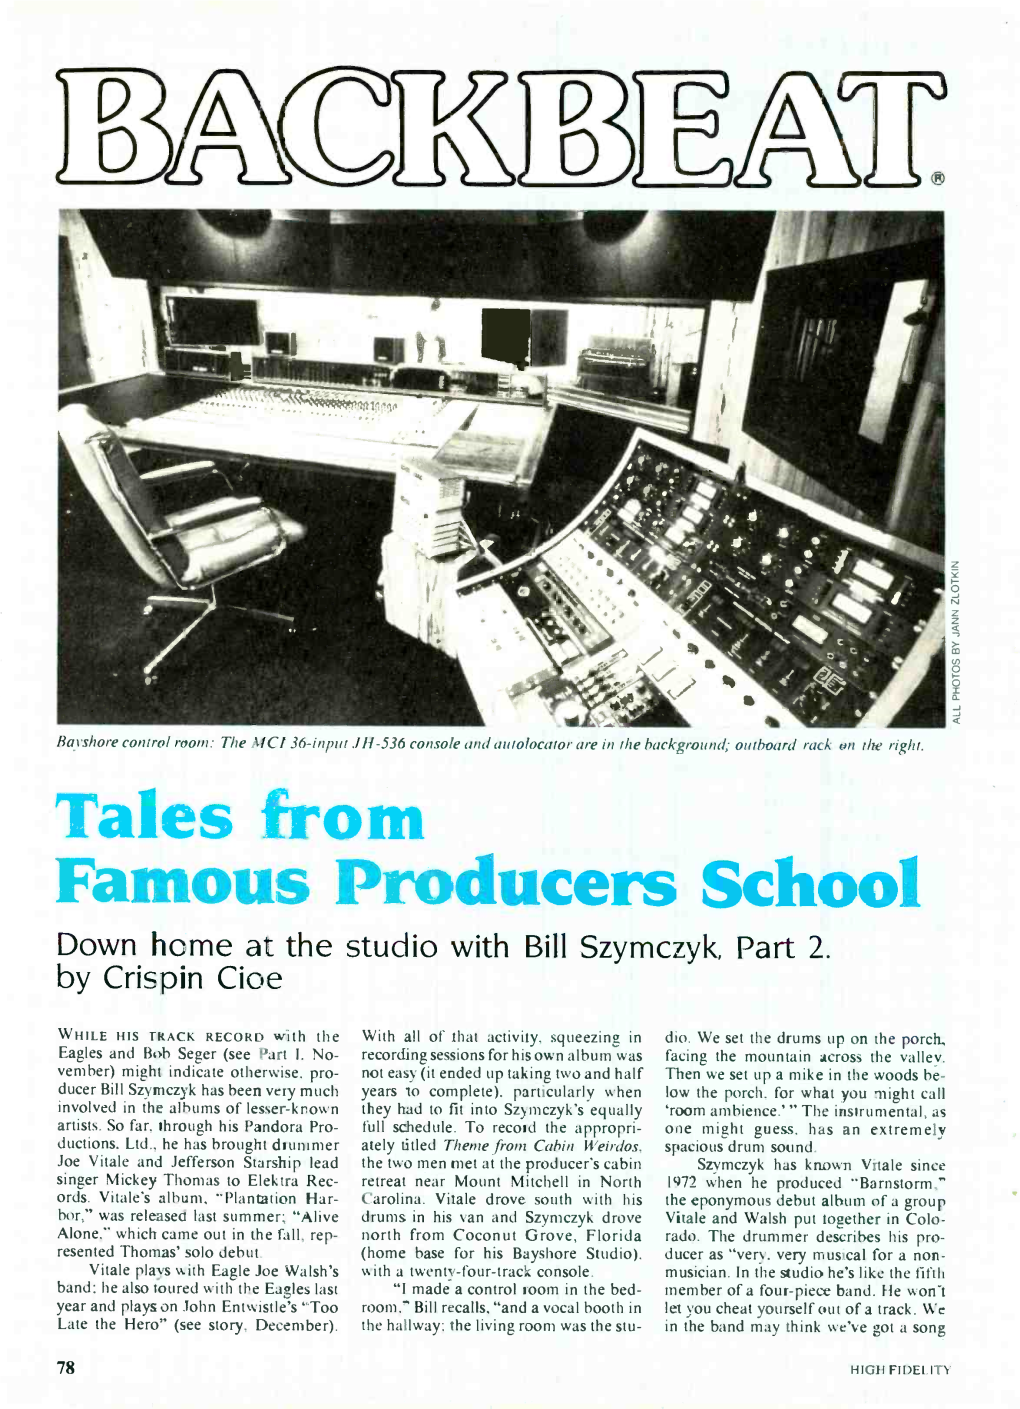 Tales from Famous Producers School Down Hcme at the Studio with Bill Szymczyk, Part 2